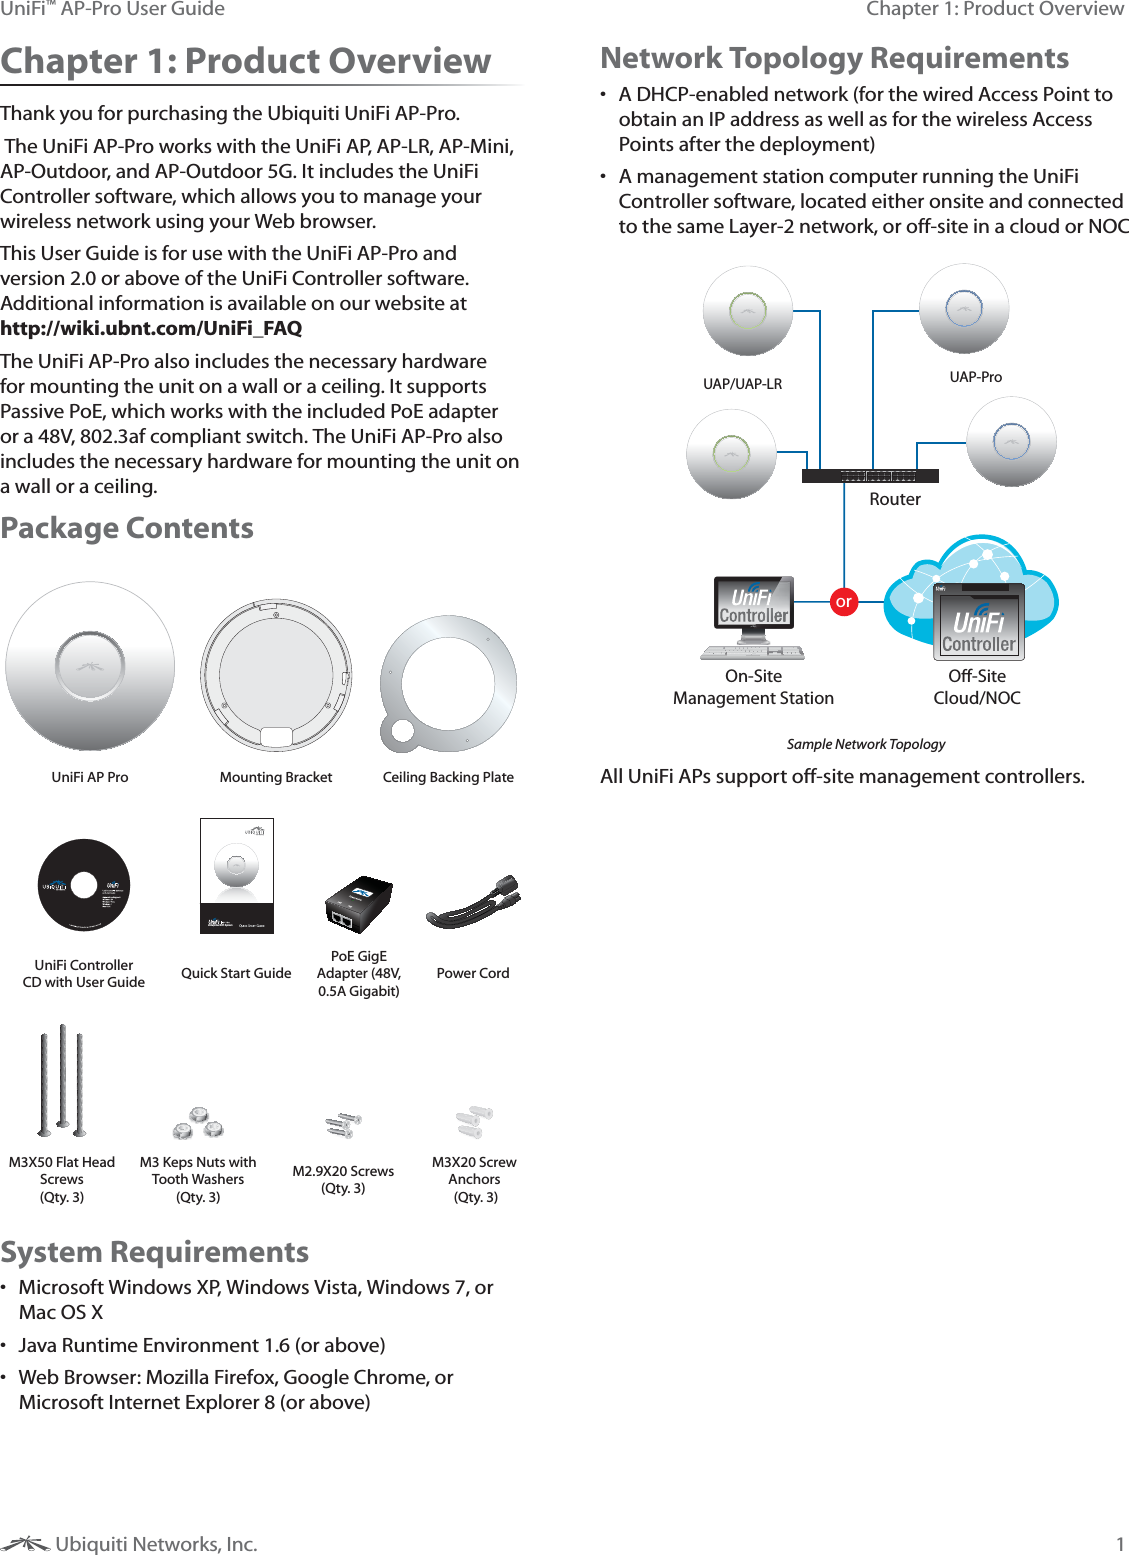 1Chapter 1: Product OverviewUniFi™ AP-Pro User Guide Ubiquiti Networks, Inc.Chapter 1: Product OverviewThank you for purchasing the Ubiquiti UniFi AP-Pro. The UniFi AP-Pro works with the UniFi AP, AP-LR, AP-Mini, AP-Outdoor, and AP-Outdoor 5G. It includes the UniFi Controller software, which allows you to manage your wireless network using your Web browser. This User Guide is for use with the UniFi AP-Pro and version 2.0 or above of the UniFi Controller software. Additional information is available on our website at  http://wiki.ubnt.com/UniFi_FAQThe UniFi AP-Pro also includes the necessary hardware for mounting the unit on a wall or a ceiling. It supports Passive PoE, which works with the included PoE adapter or a 48V, 802.3af compliant switch. The UniFi AP-Pro also includes the necessary hardware for mounting the unit on a wall or a ceiling. Package ContentsUniFi AP Pro Mounting Bracket Ceiling Backing Plate,U[LYWYPZL&gt;P-P:`Z[LTUniFi Controller CD with User Guide Quick Start GuidePoE GigE Adapter (48V, 0.5A Gigabit)Power CordM3X50 Flat Head Screws  (Qty. 3)M3 Keps Nuts with Tooth Washers (Qty. 3)M2.9X20 Screws (Qty. 3)M3X20 Screw Anchors  (Qty. 3)System Requirements Microsoft Windows XP, Windows Vista, Windows 7, or Mac OS X Java Runtime Environment 1.6 (or above) Web Browser: Mozilla Firefox, Google Chrome, or Microsoft Internet Explorer 8 (or above)Network Topology Requirements A DHCP-enabled network (for the wired Access Point to obtain an IP address as well as for the wireless Access Points after the deployment) A management station computer running the UniFi Controller software, located either onsite and connected to the same Layer-2 network, or off-site in a cloud or NOCorRouterO-SiteCloud/NOCOn-SiteManagement StationUAP/UAP-LR UAP-ProSample Network TopologyAll UniFi APs support off-site management controllers.